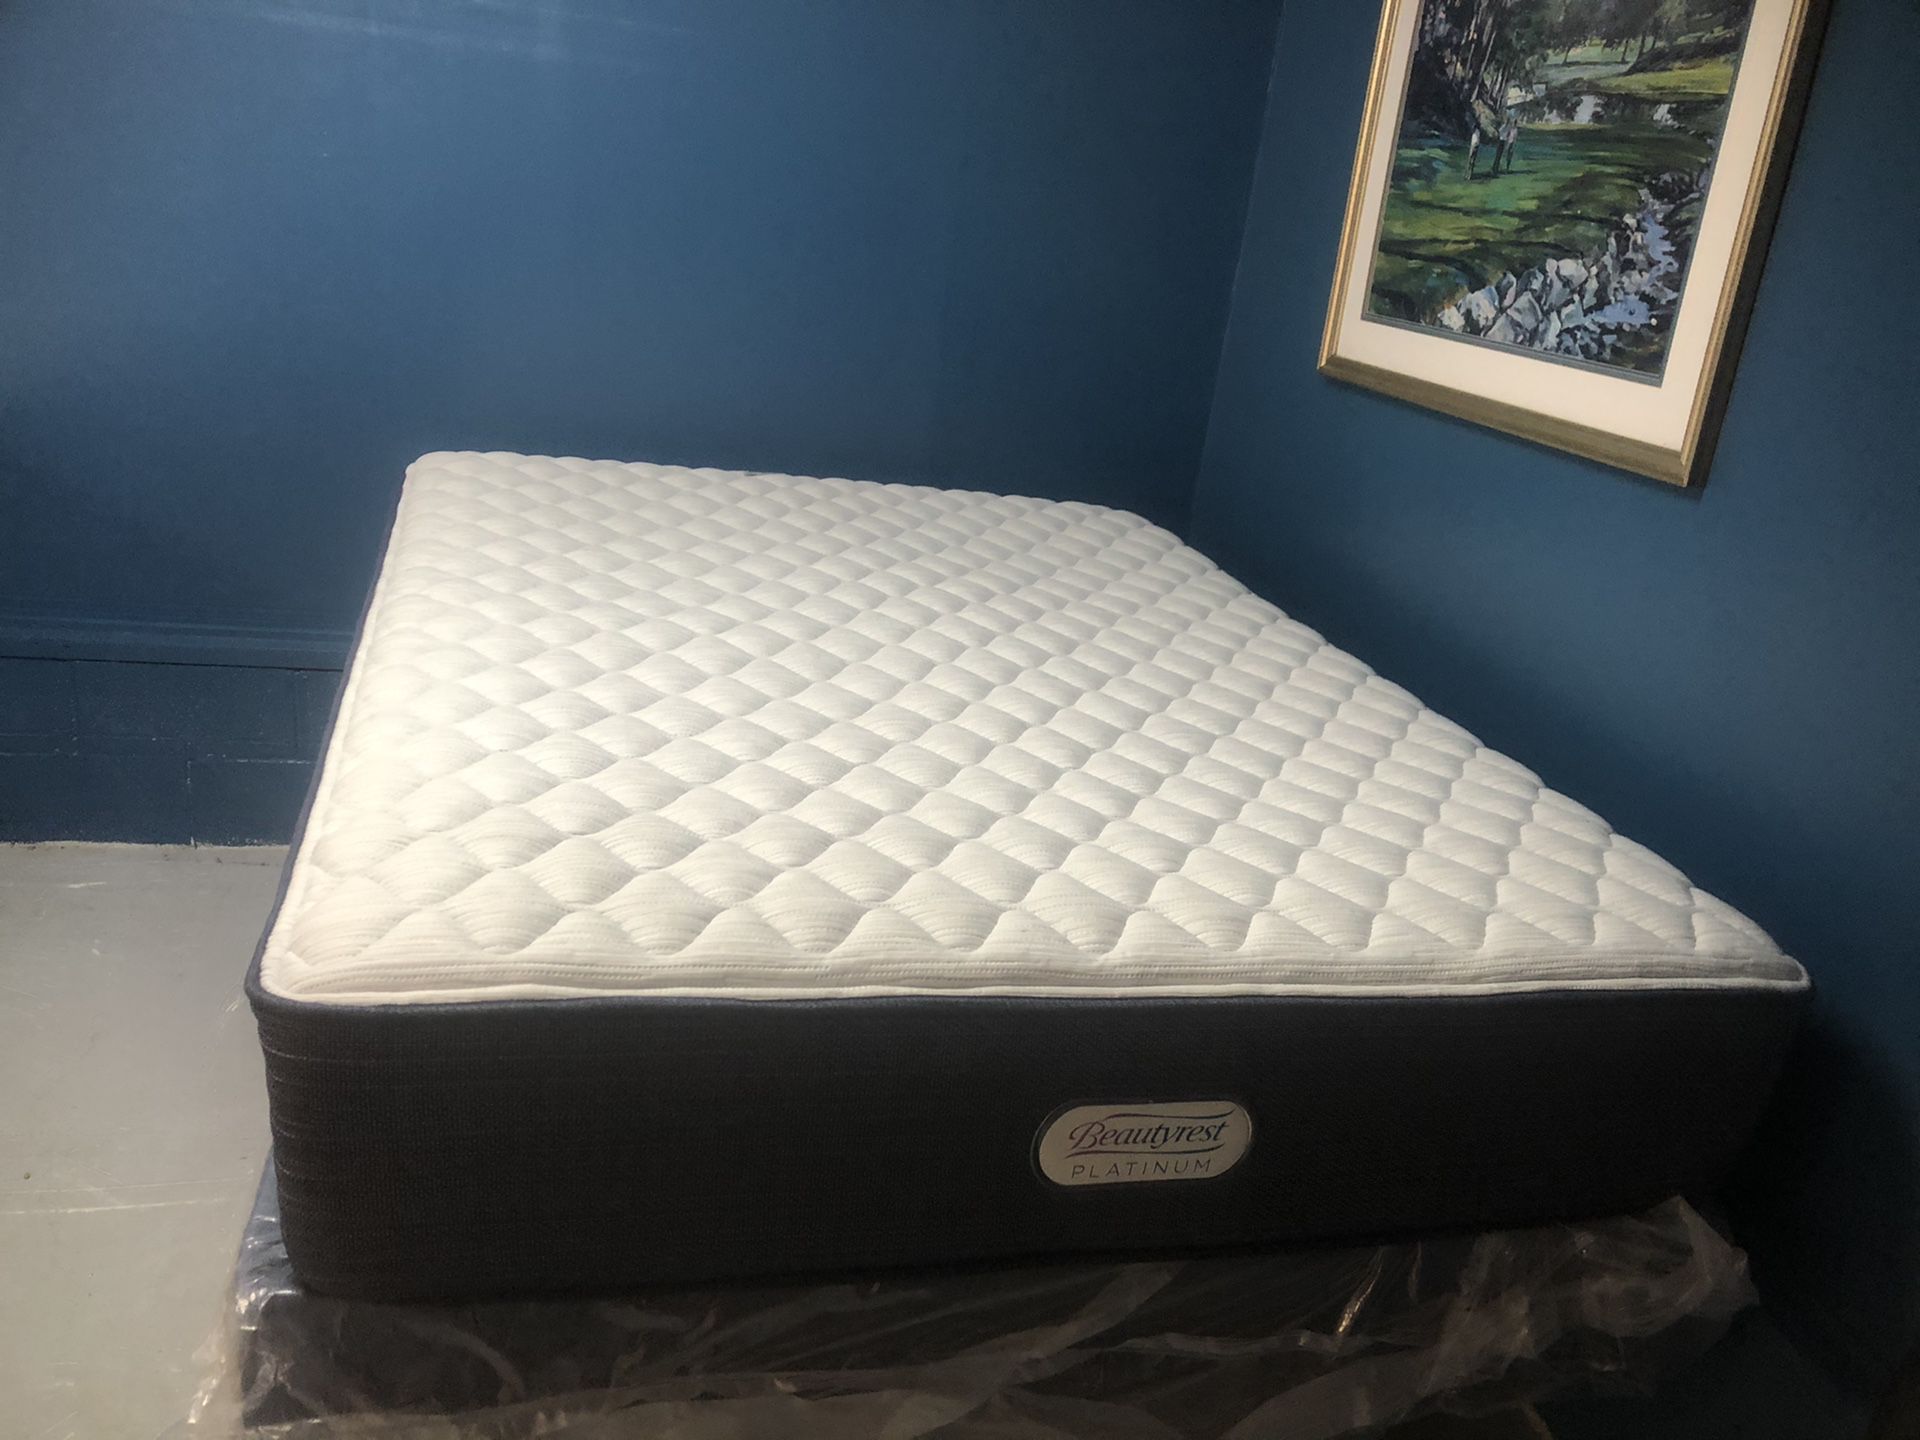 New condition Queen beautyrest mattress and box spring